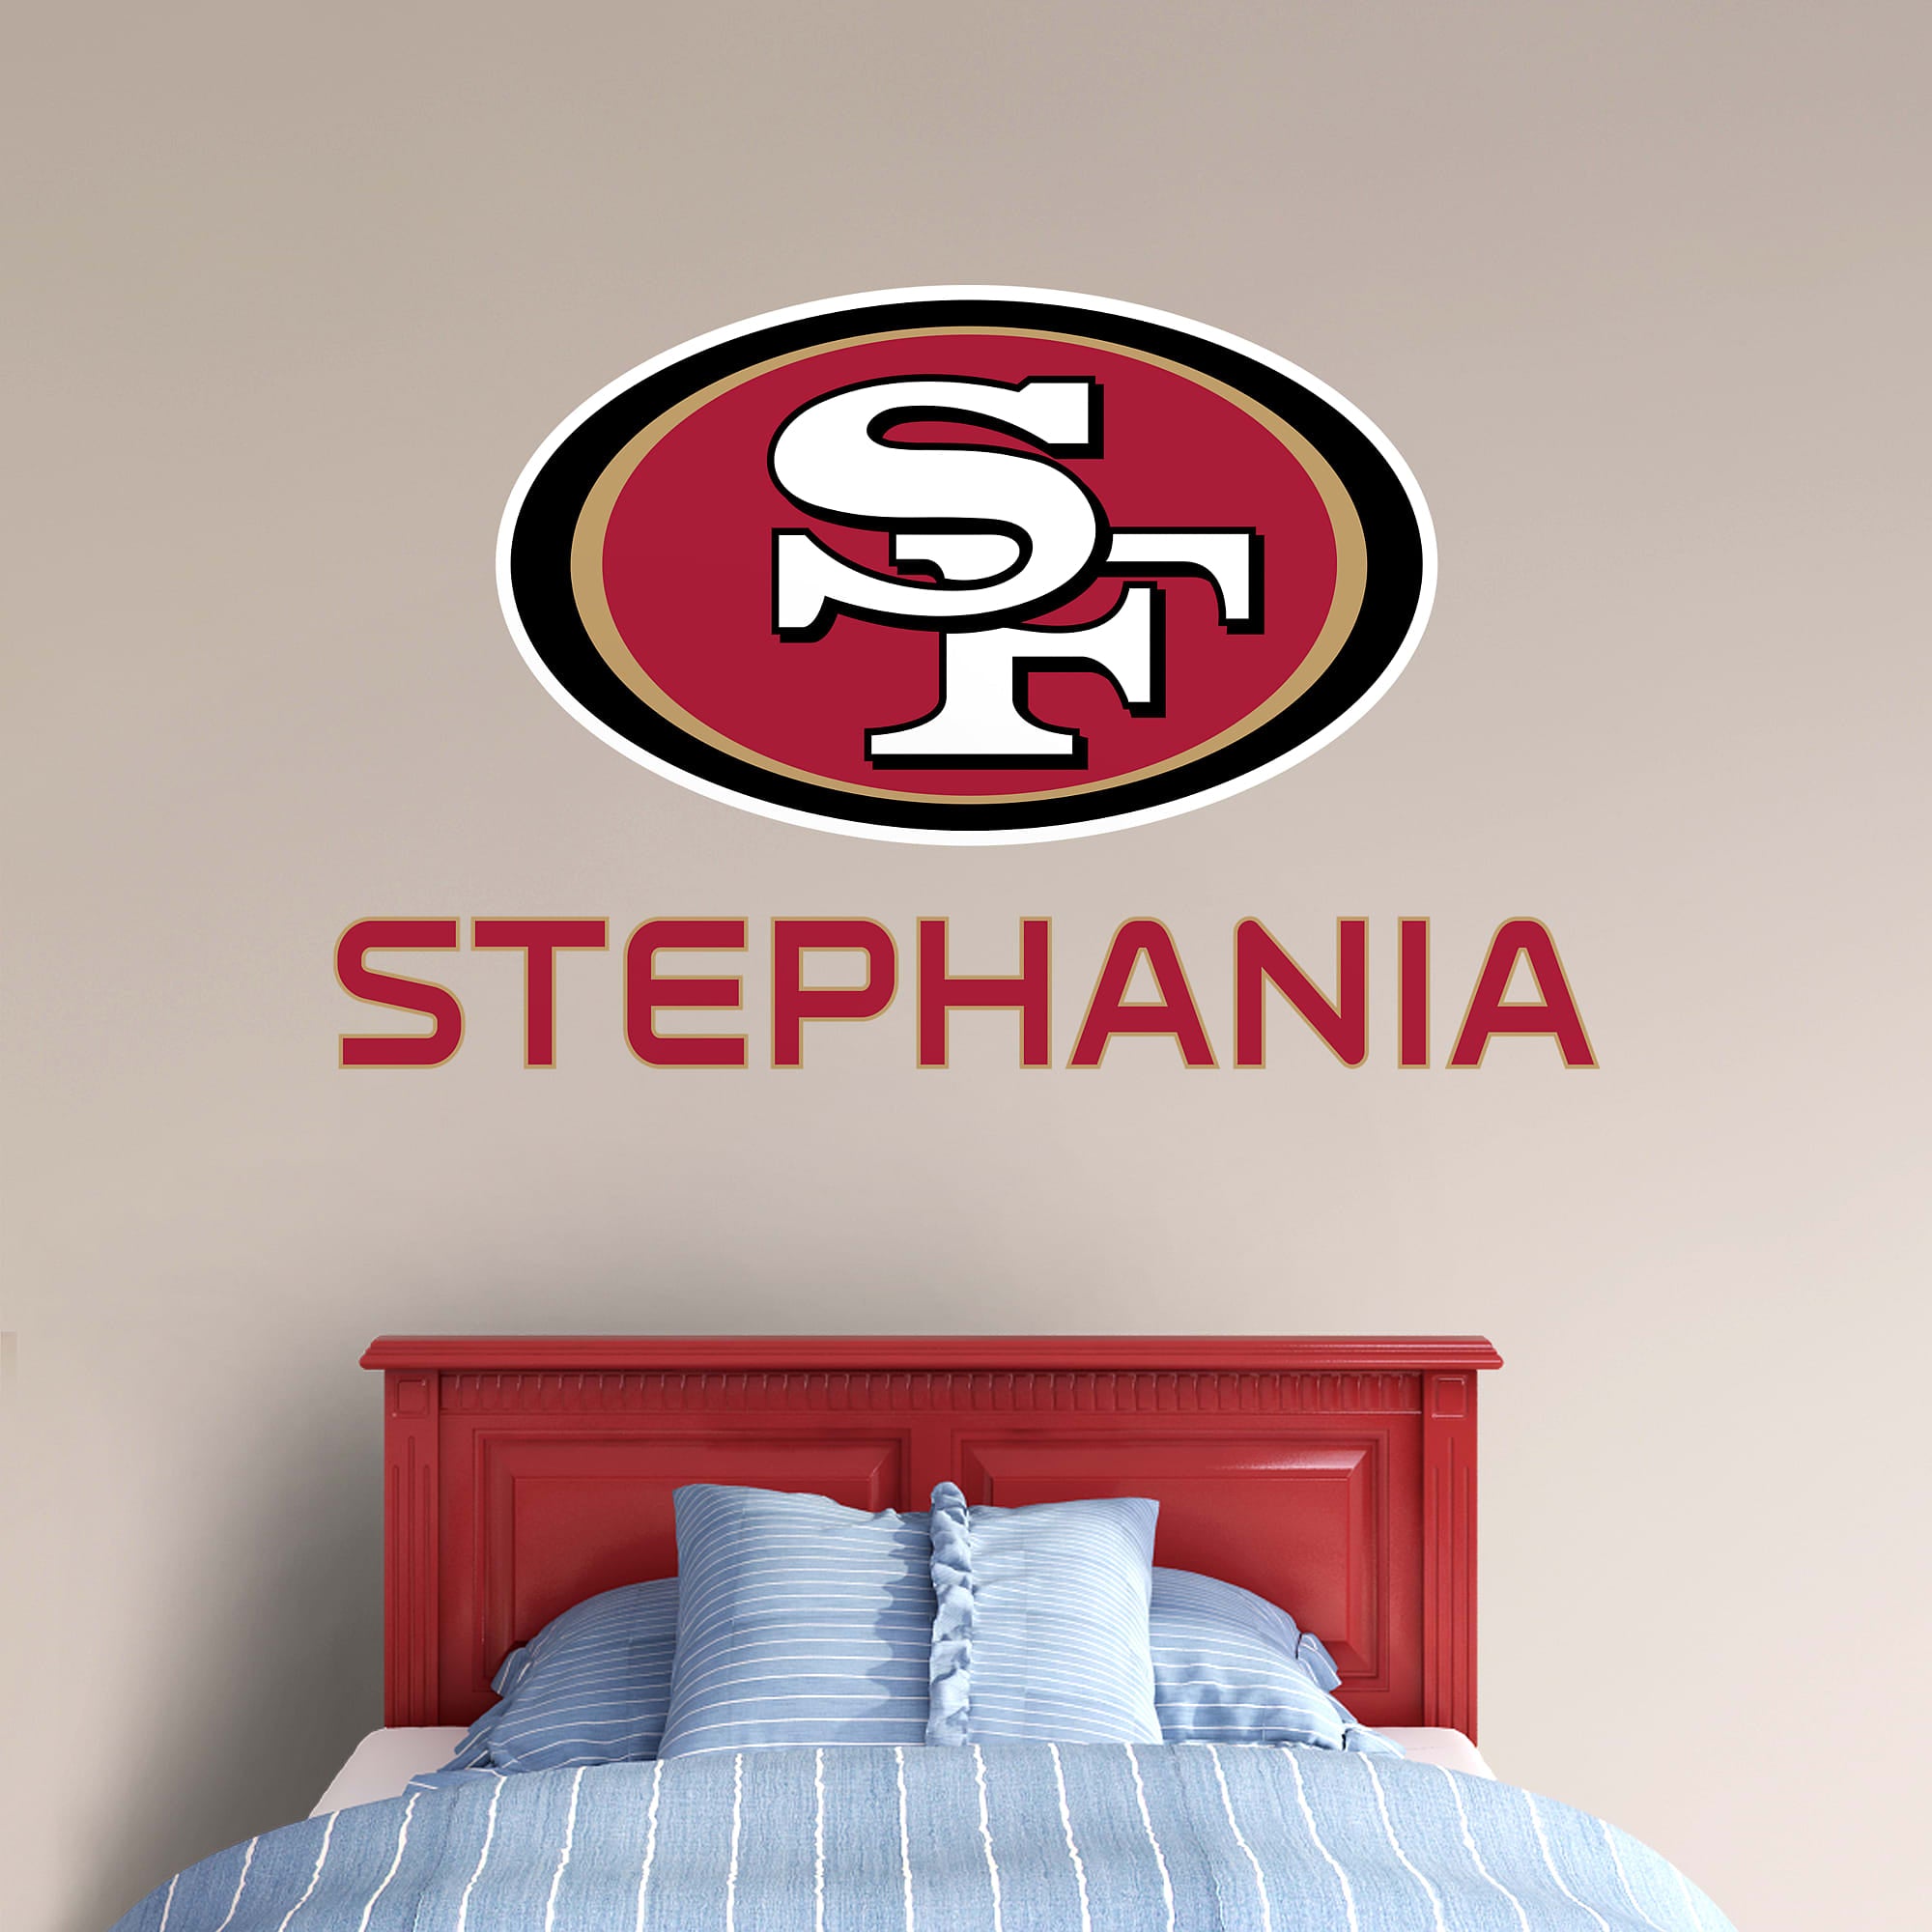 San Francisco 49ers: Stacked Personalized Name - Officially Licensed NFL Transfer Decal in Red (52"W x 39.5"H) by Fathead | Viny